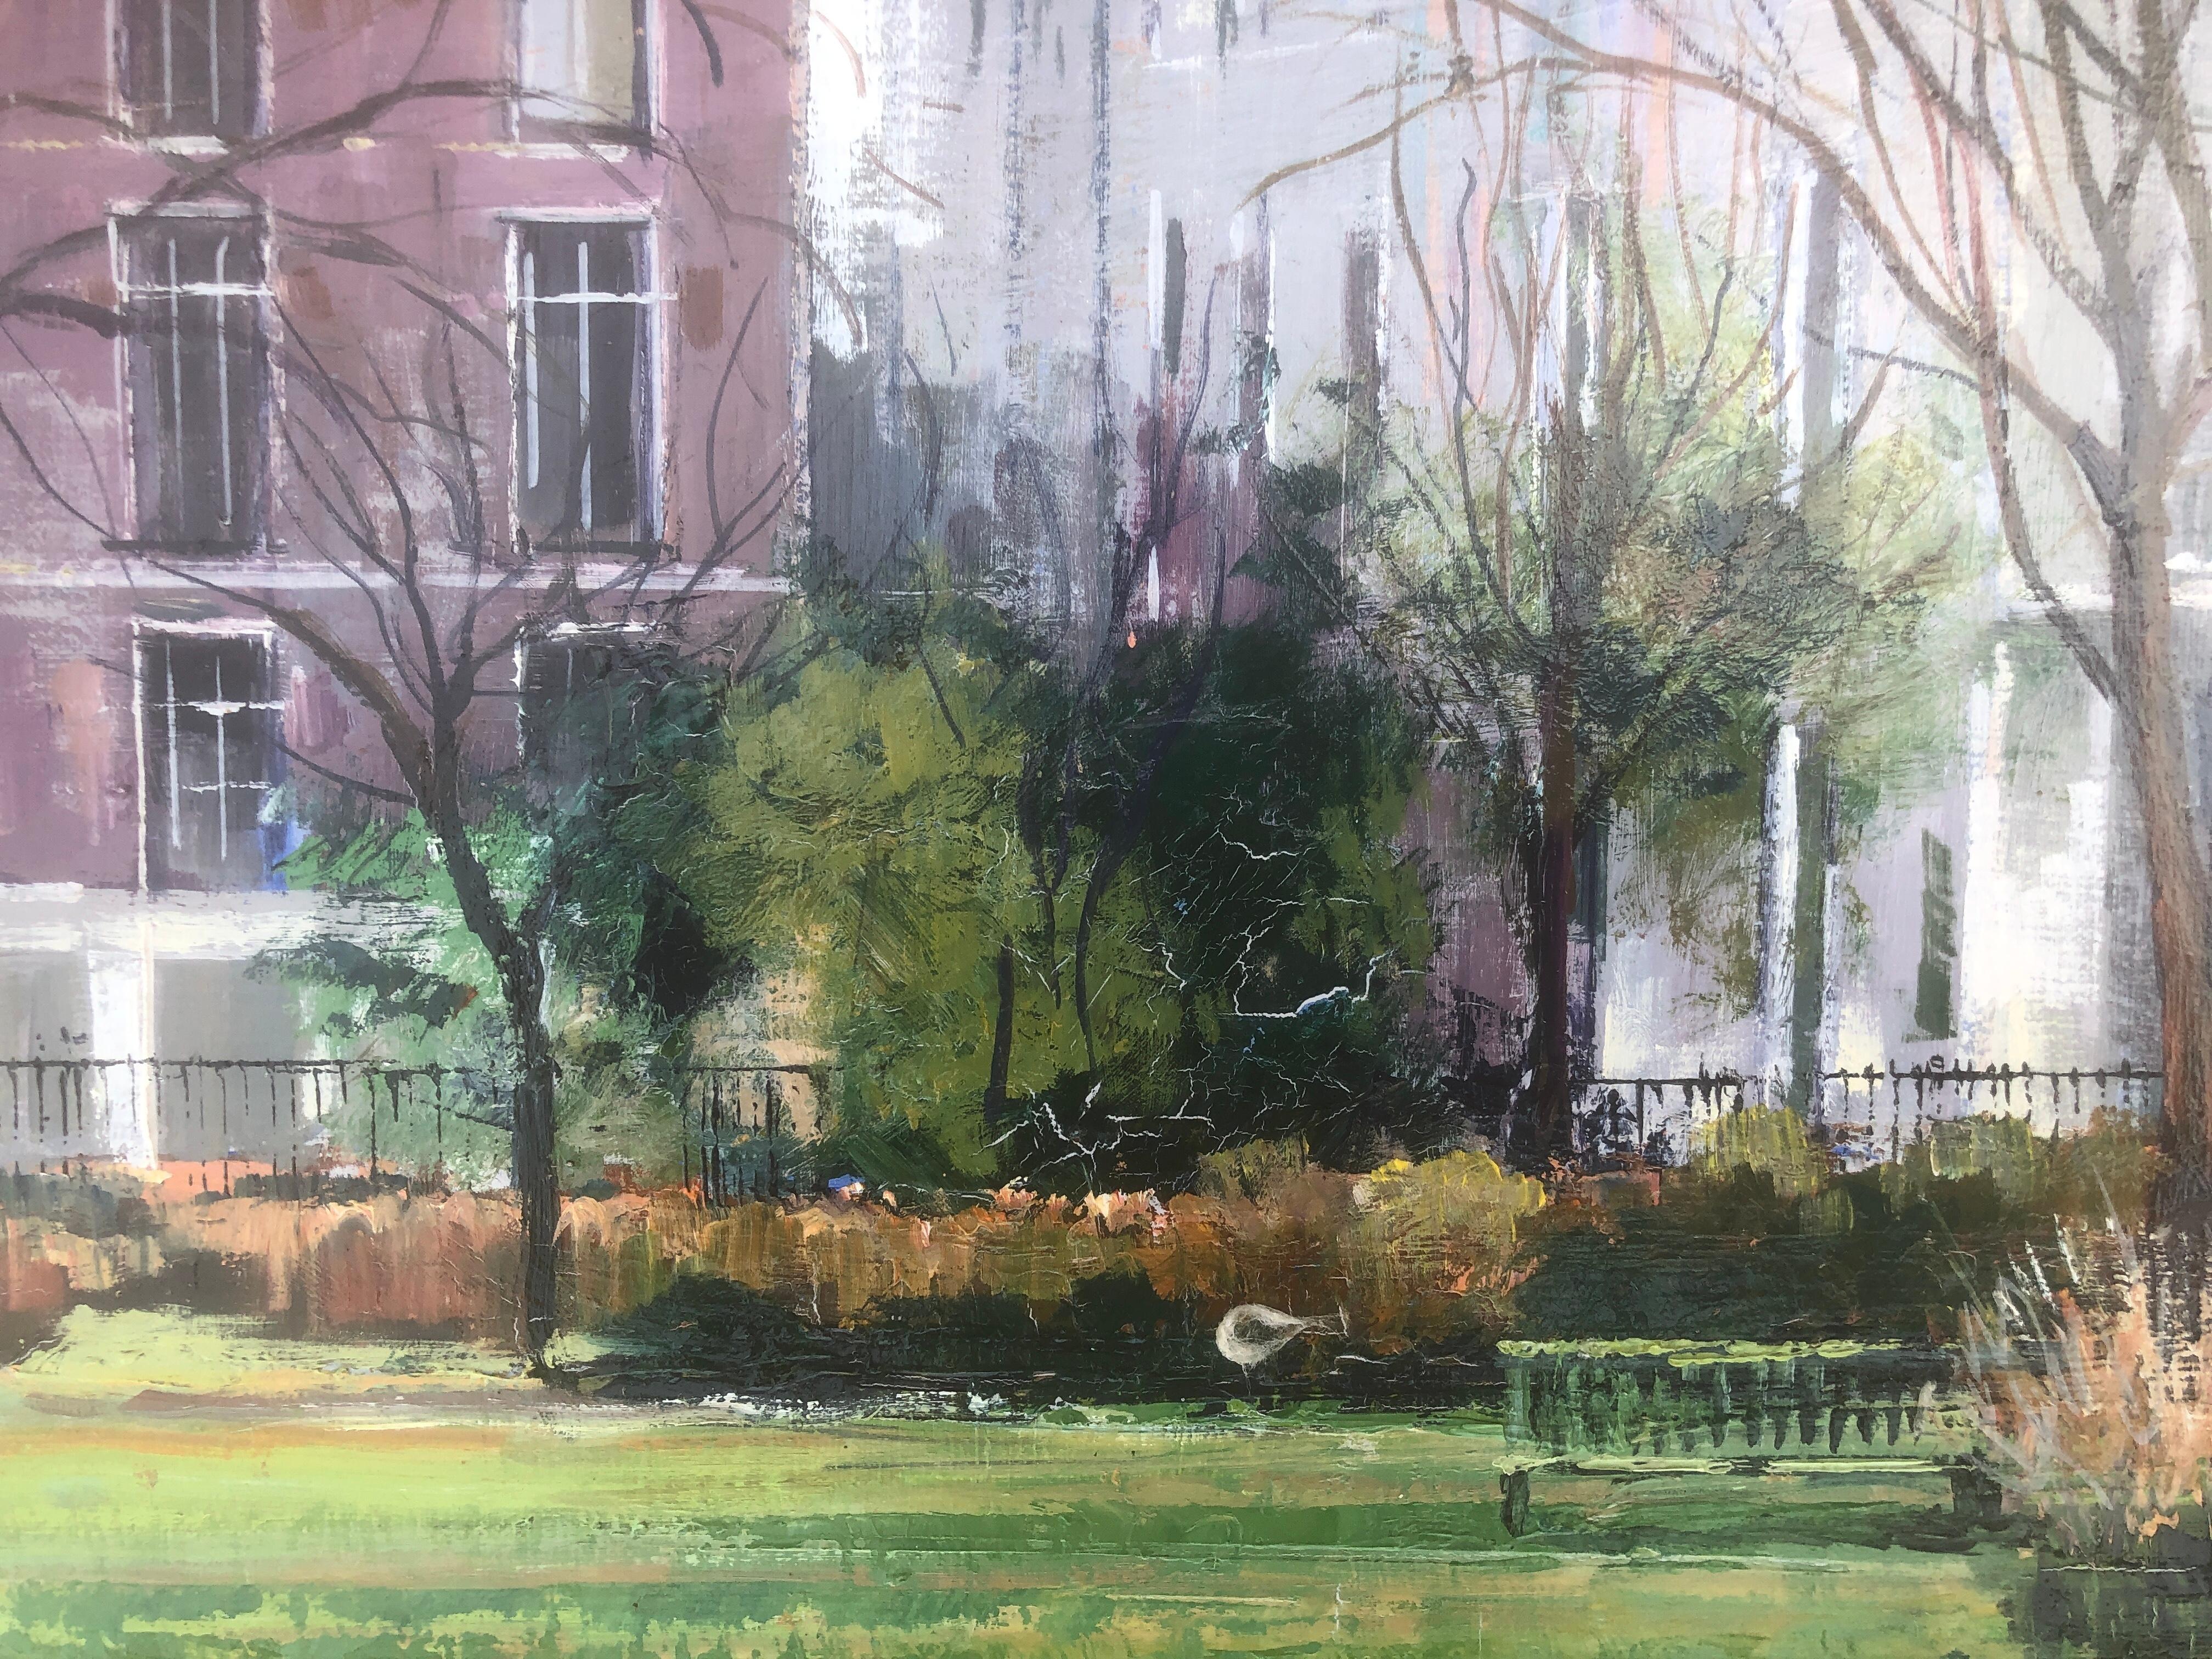 Vayreda Canadell - Sant James park London - Oil canvas 46x55
Oil measurements 46x55 cm.
Frame measurements 71x80 cm.
Some areas have cracks in the paint.

Josep Maria Vayreda Canadell
Year of birth: 1932
Biography:
Member of a family spanish saga of